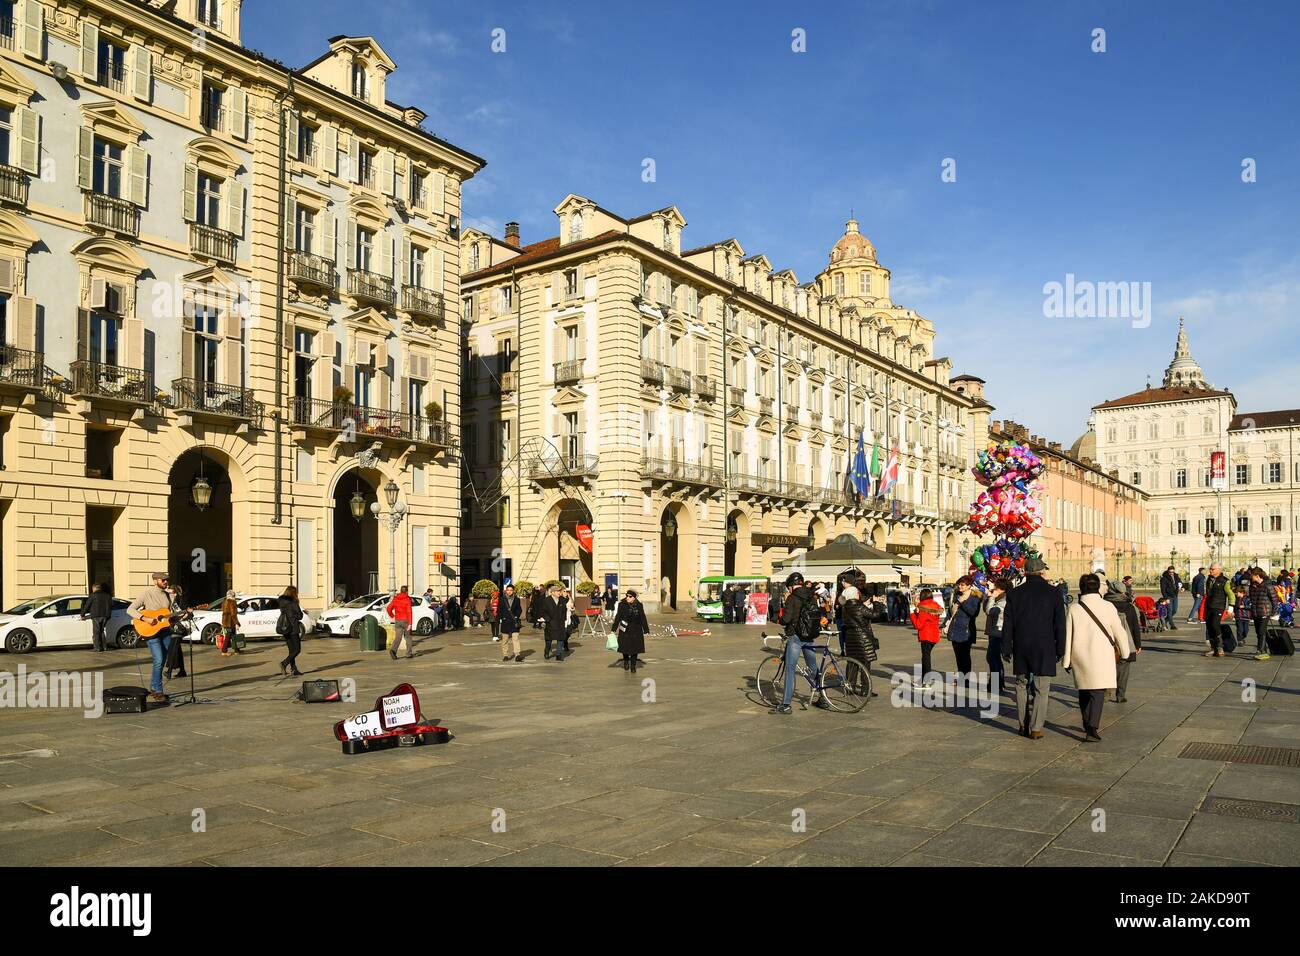 Glimpse of Piazza Castello in the centre of Turin with a street musician, people and tourists in a sunny day before Christmas, Piedmont, Italy Stock Photo